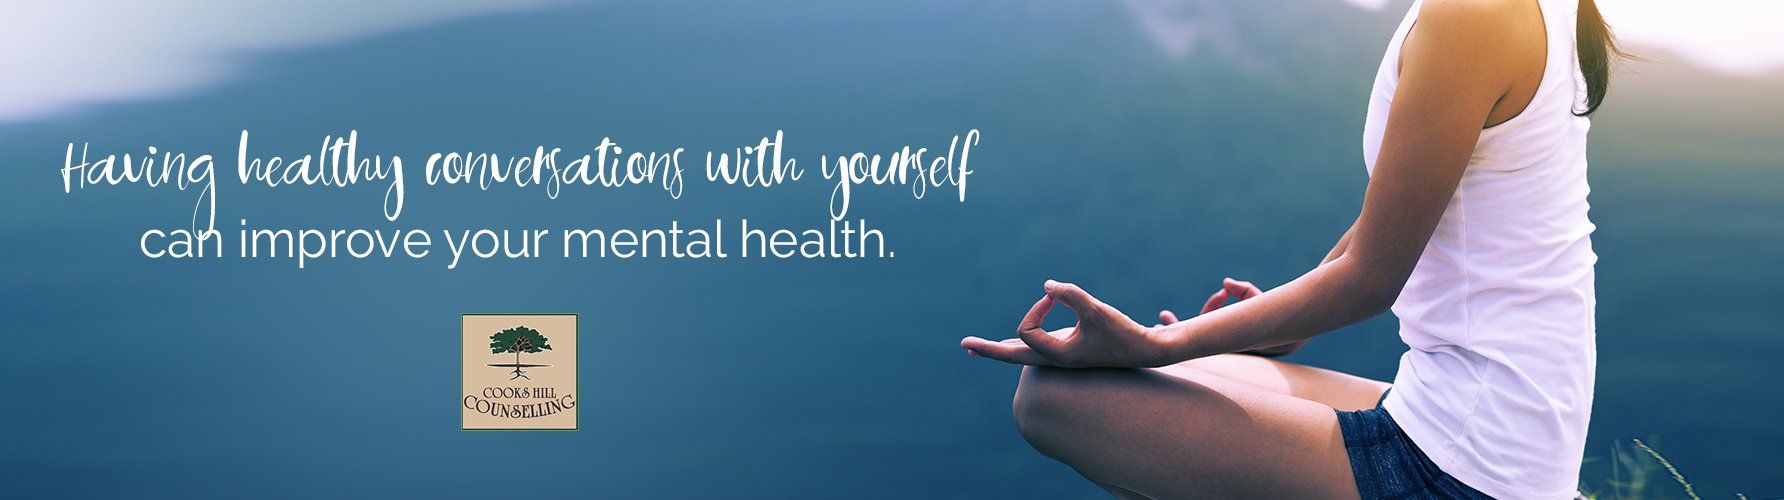 Having healthy conversations with yourself can improve your mental health